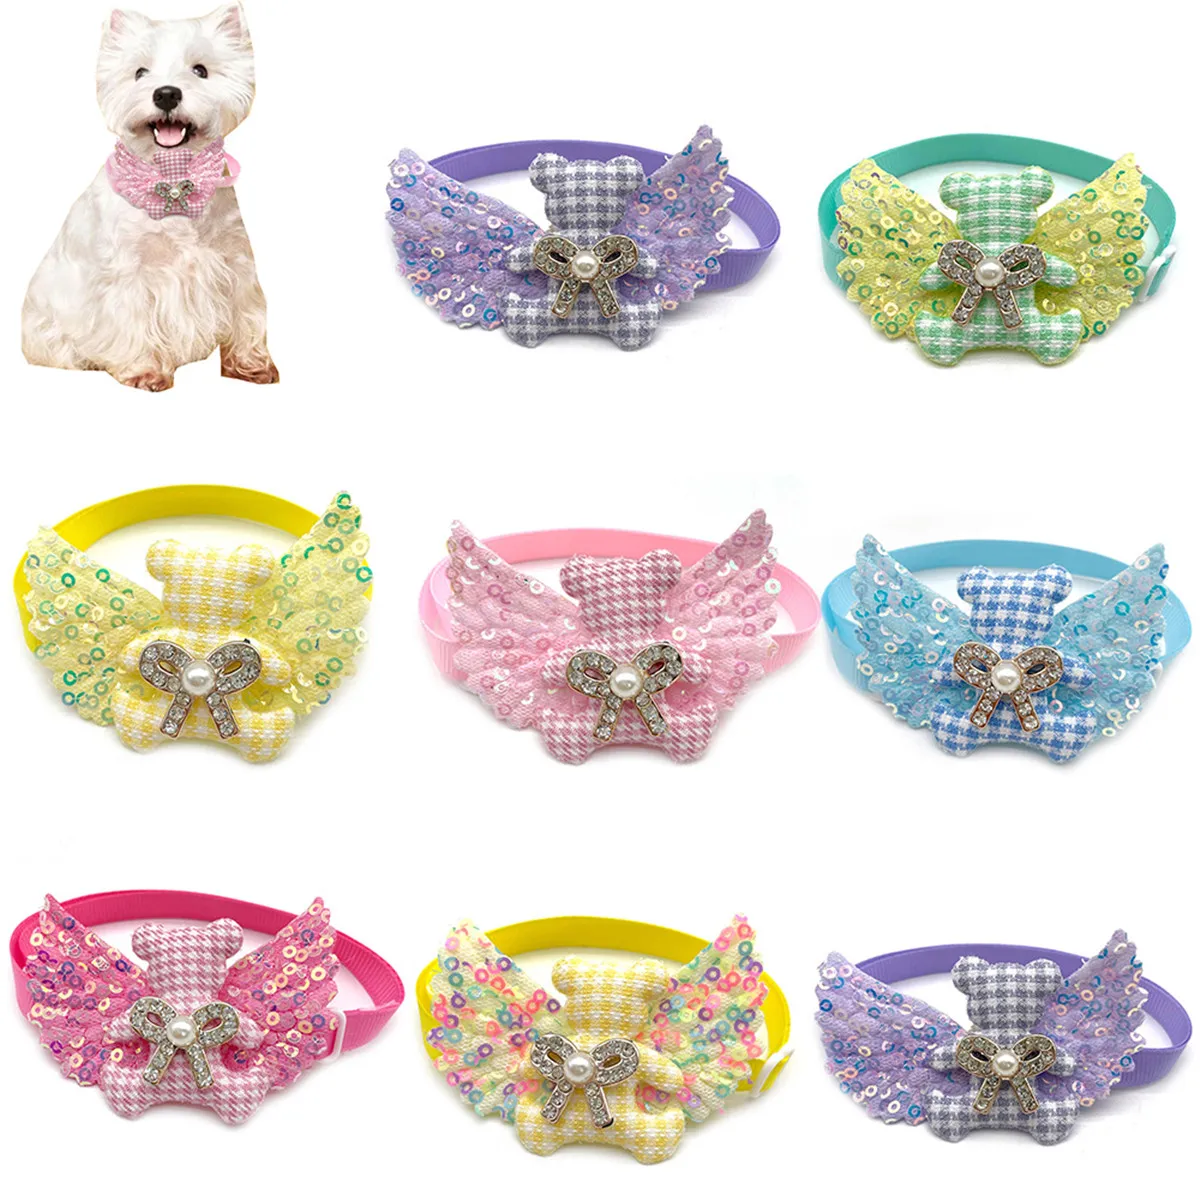 

30/50pcs Small Dog Cat Wing Style Dog Bow Ties Neckties Adjustable Collars for Pet Dog Grooming Accssories